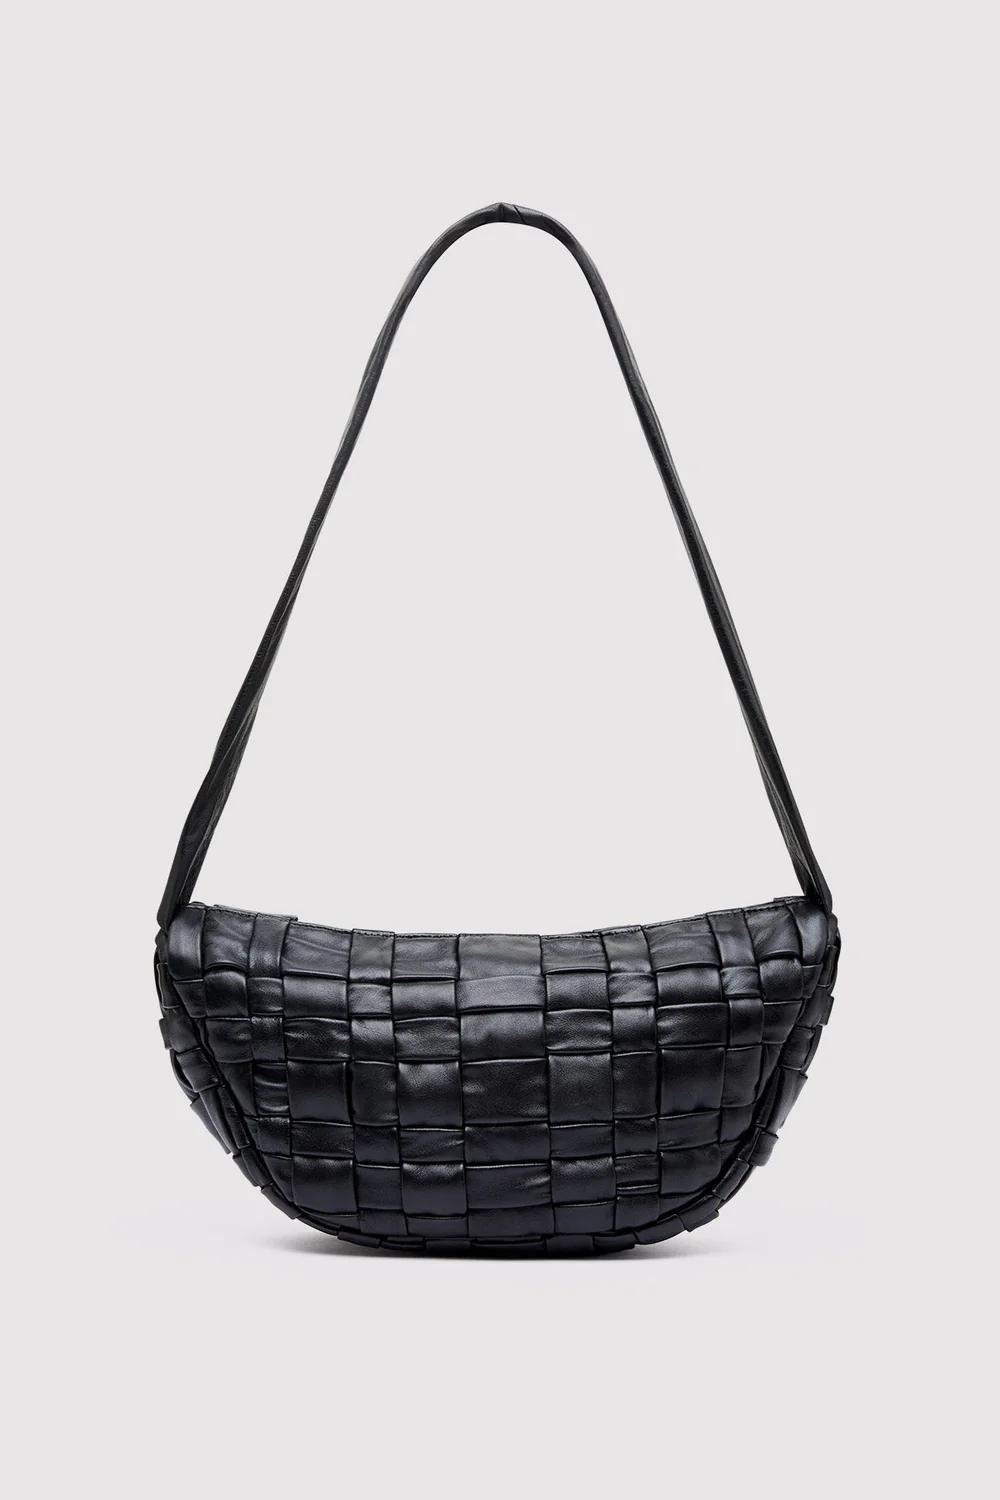 Product Image for Textured Crescent Bag, Black